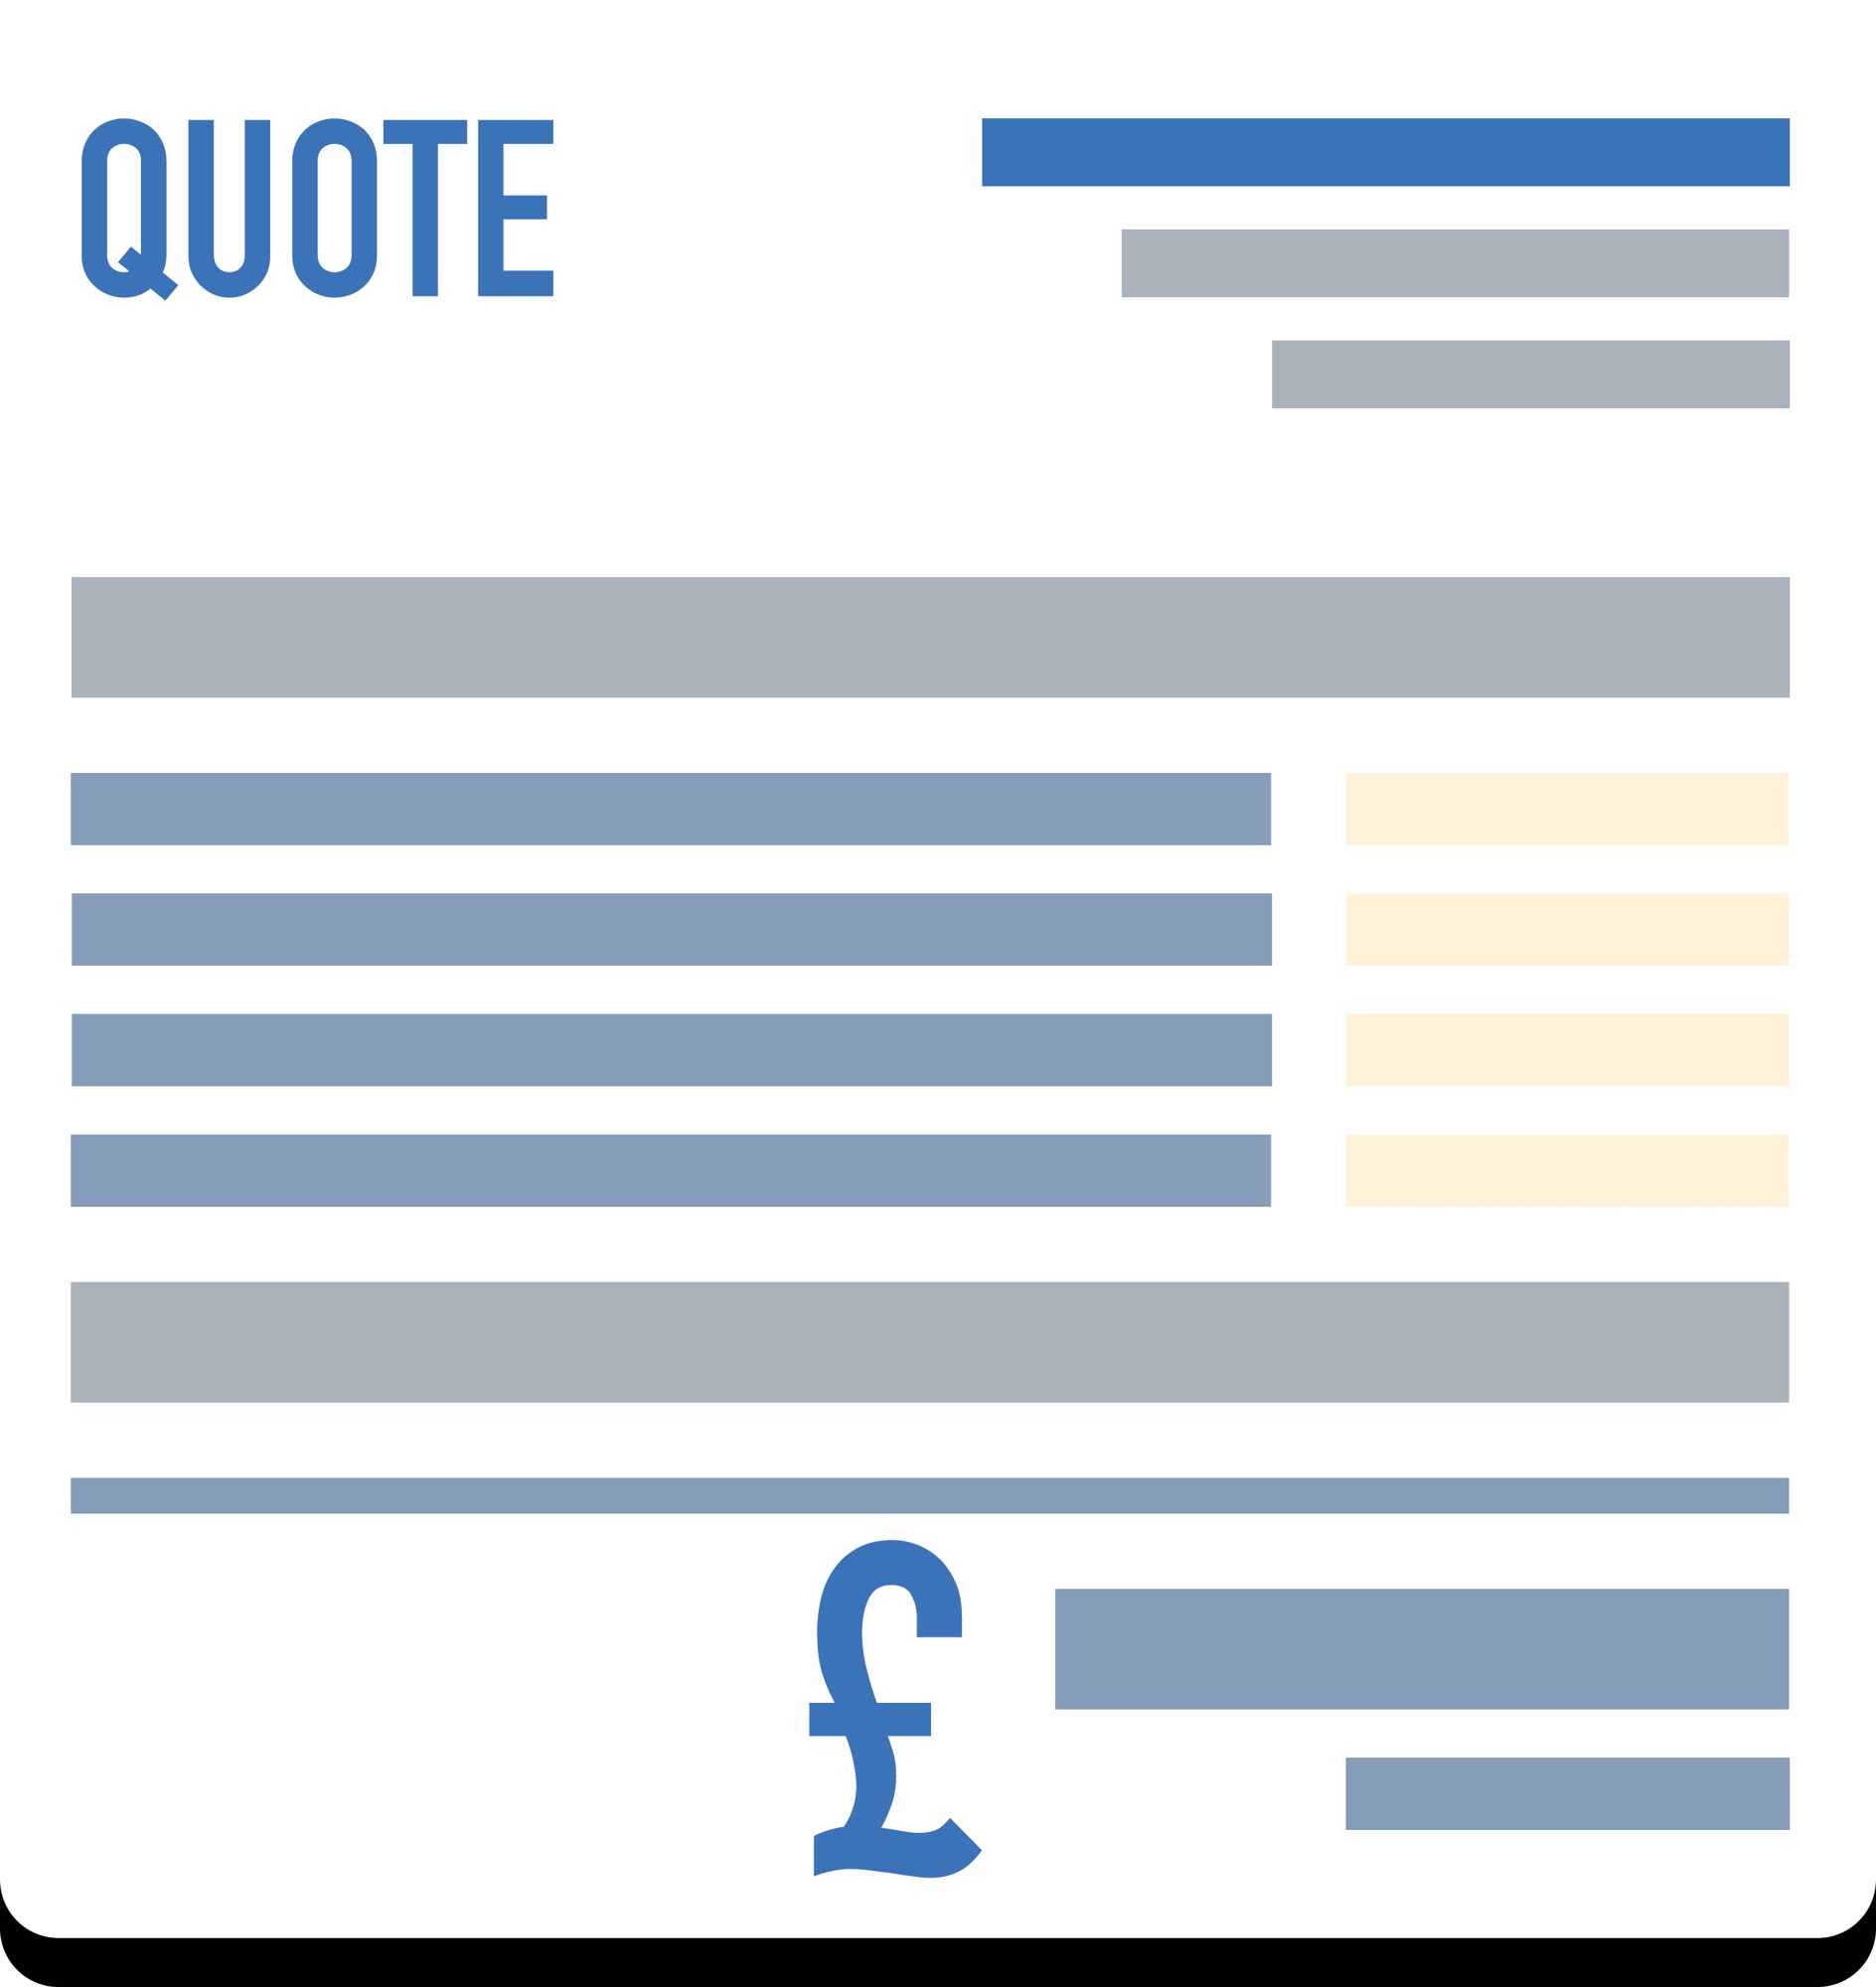 Quote template for roofing company